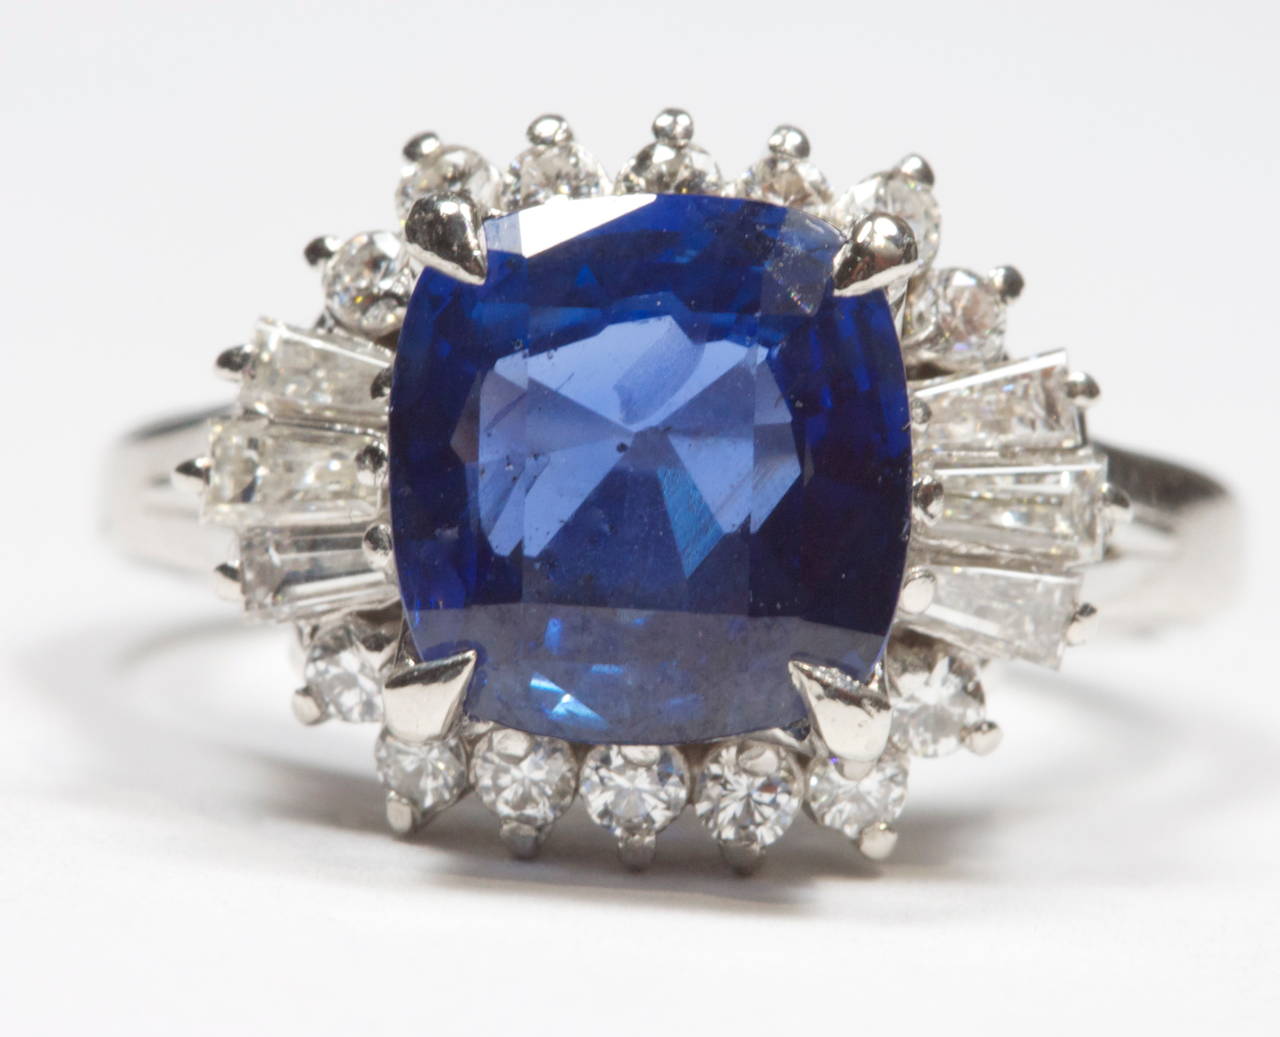 The vivd deep blue sapphire weighs 2.88 carats and has been set in a modernistic halo mounting that has been decorated with a mixture of baguette and round cut diamonds weighing 0.58 carats. Set in a platinum ring.

Ring size 6 and can be re-sized.